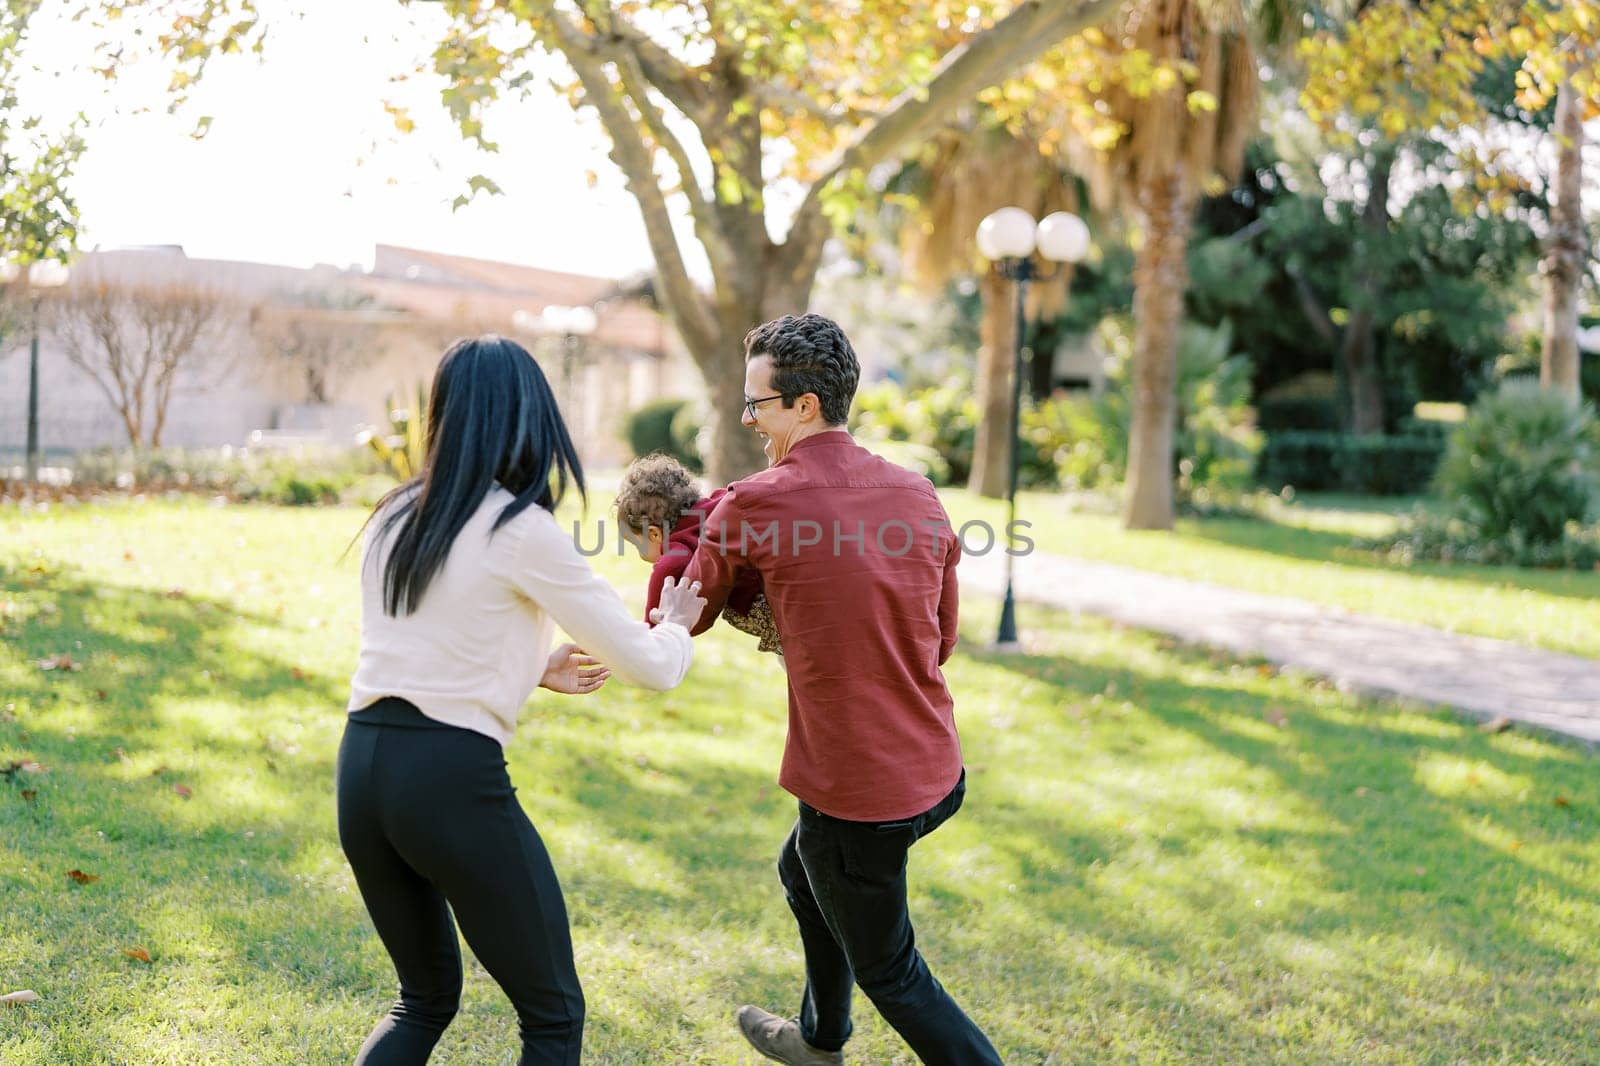 Laughing dad runs around mom in the park with a little girl in his arms by Nadtochiy